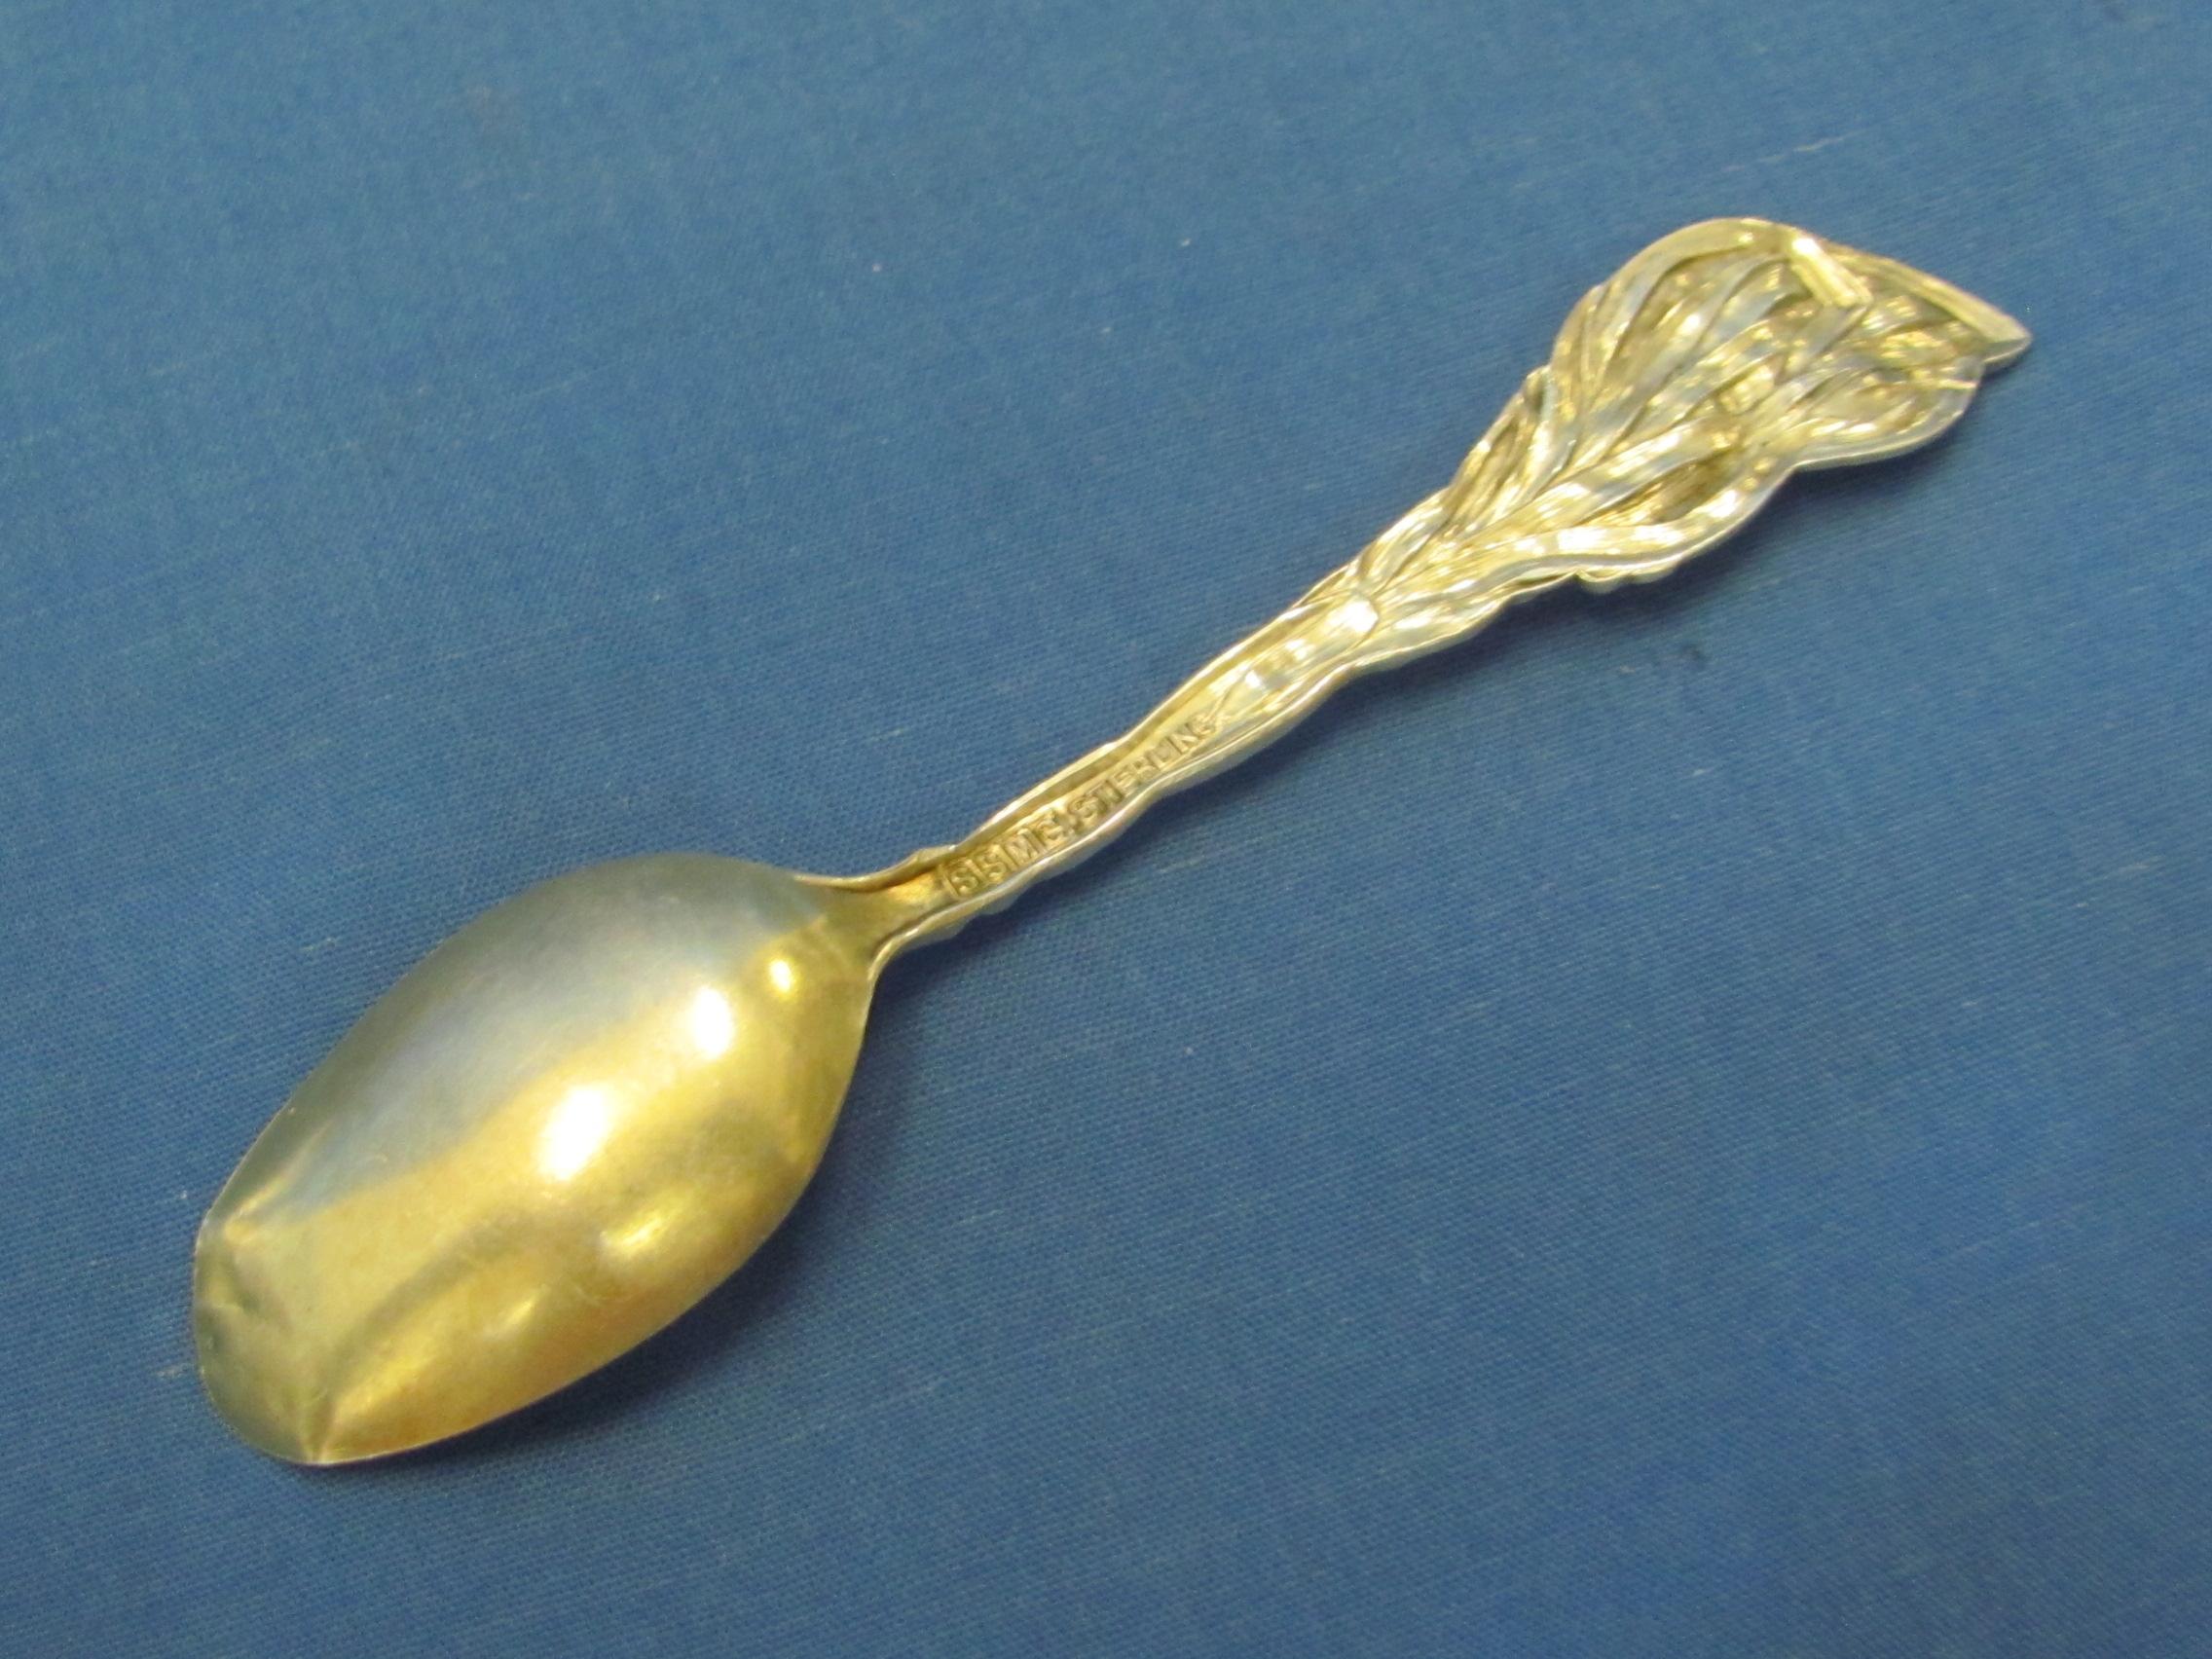 Sterling Silver Spoon “Court House Anaconda Mont.” - Indian Chief among Cornfields